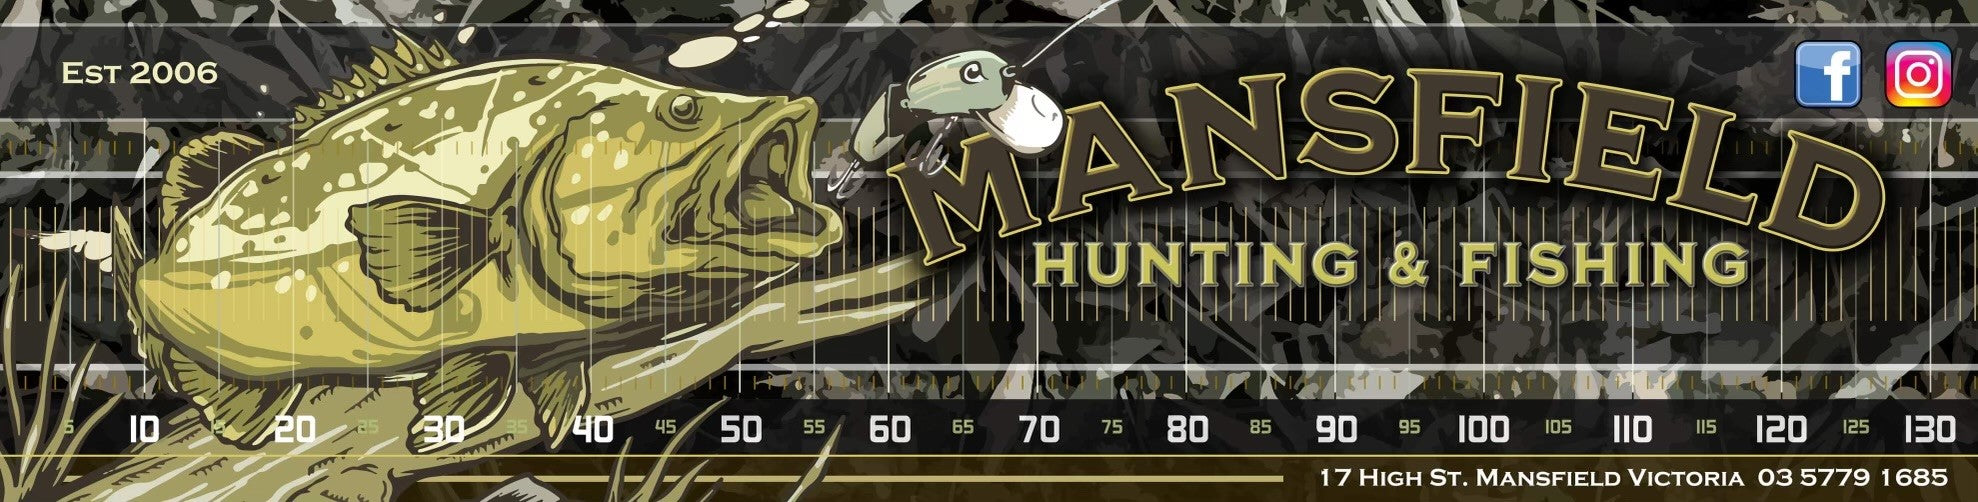 MHF Brag Mat - 130cm -  - Mansfield Hunting & Fishing - Products to prepare for Corona Virus